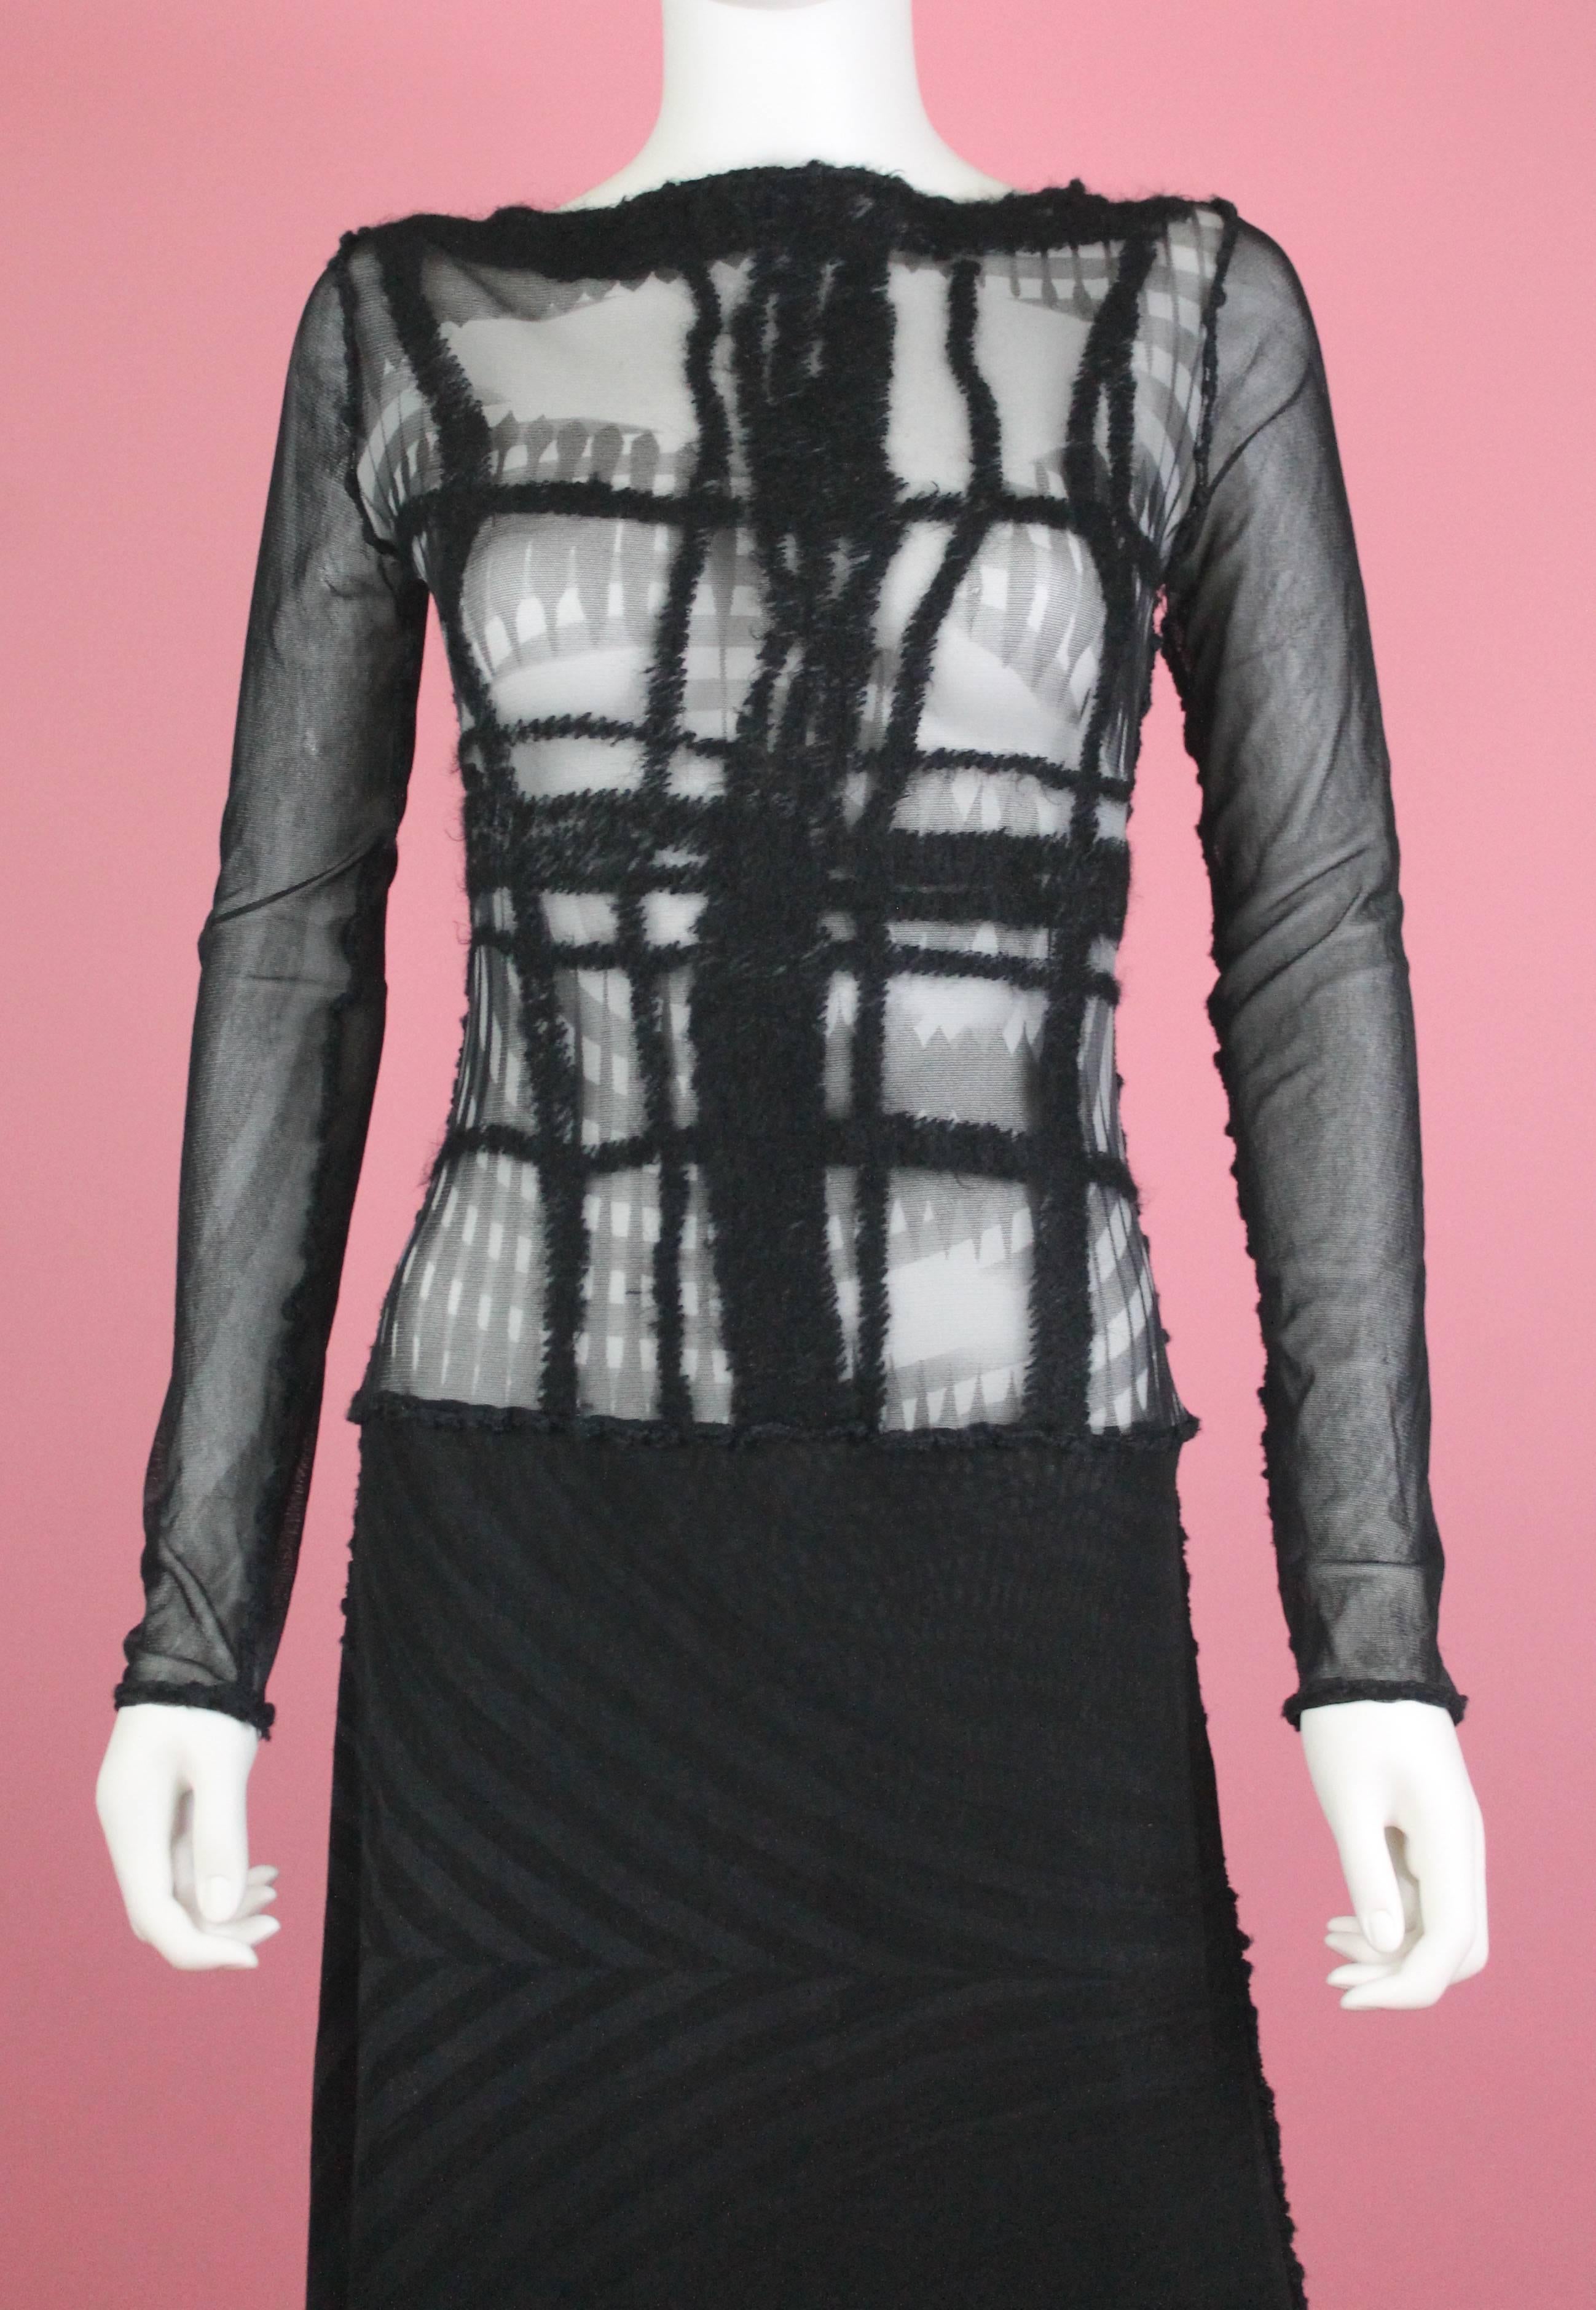 -One of my favorite pieces currently by French designer Jean Paul Gaultier 
-Features a print of Greta Garbo's face on both sides
-Backside isn't covered by fuzzy stitching
-Bottom half of dress features lined print
-True collector's item from